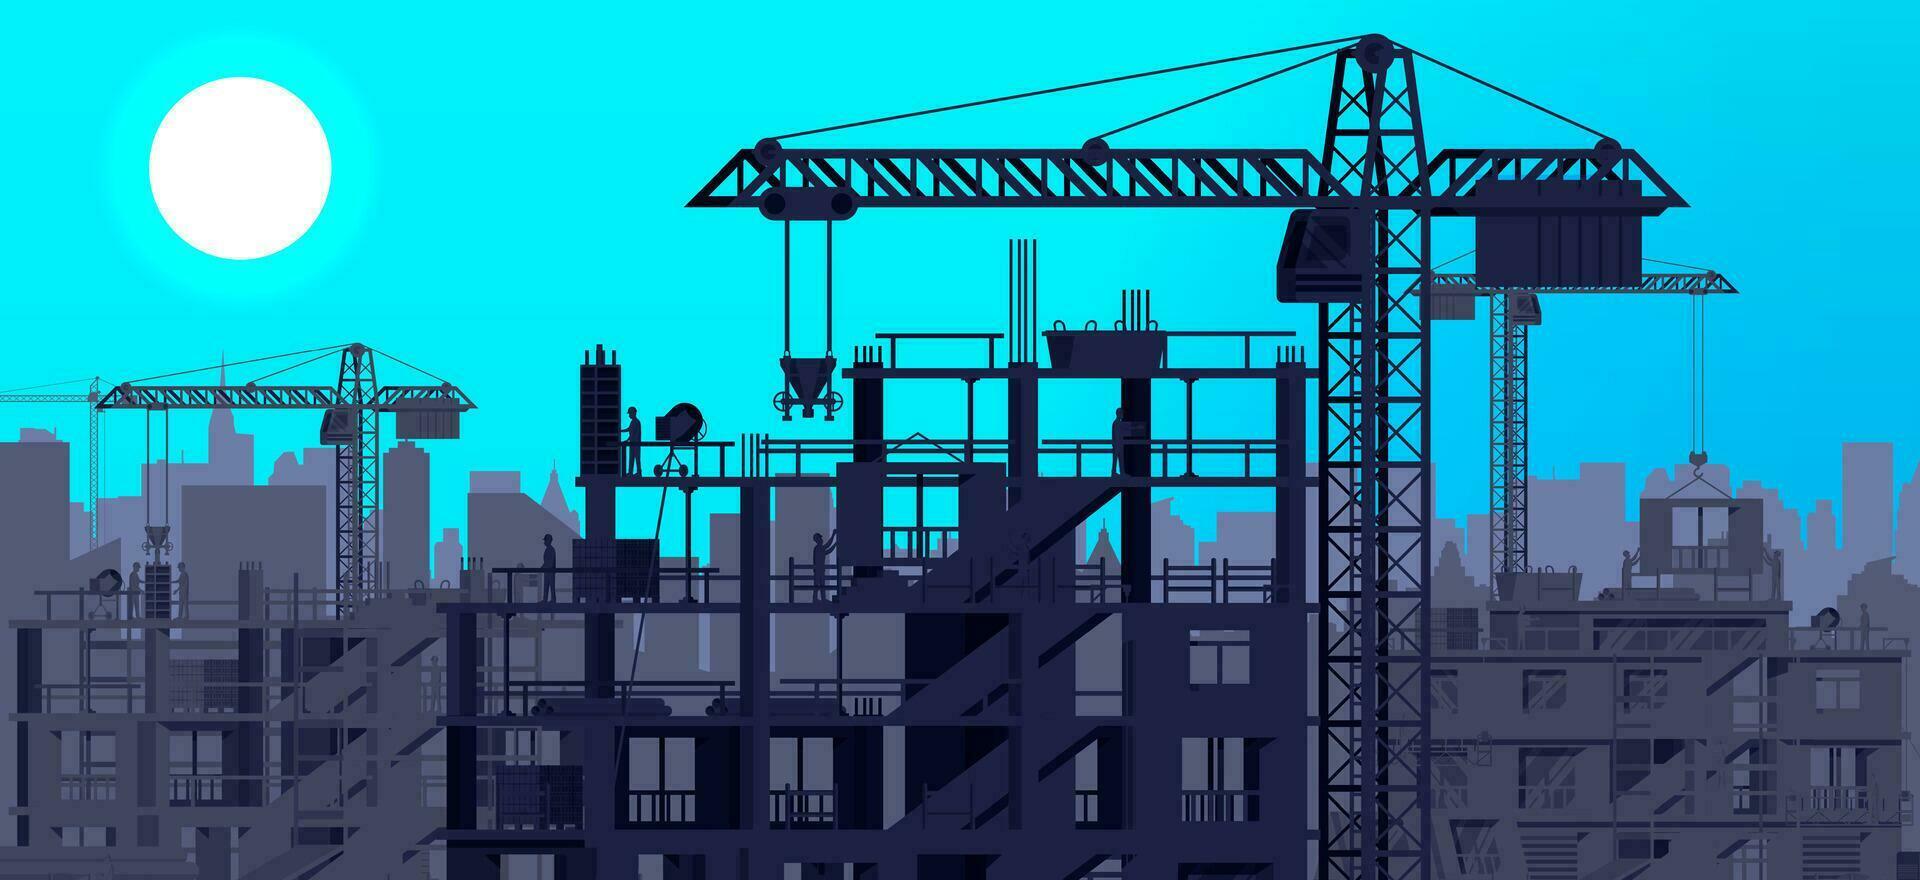 Construction Site Banner Silhouette Landscape. Rooftop, Workers, Concrete Piles, Tower Crane. Under Construction Design Background. Building Materials and Equipment. Cartoon Flat Vector Illustration